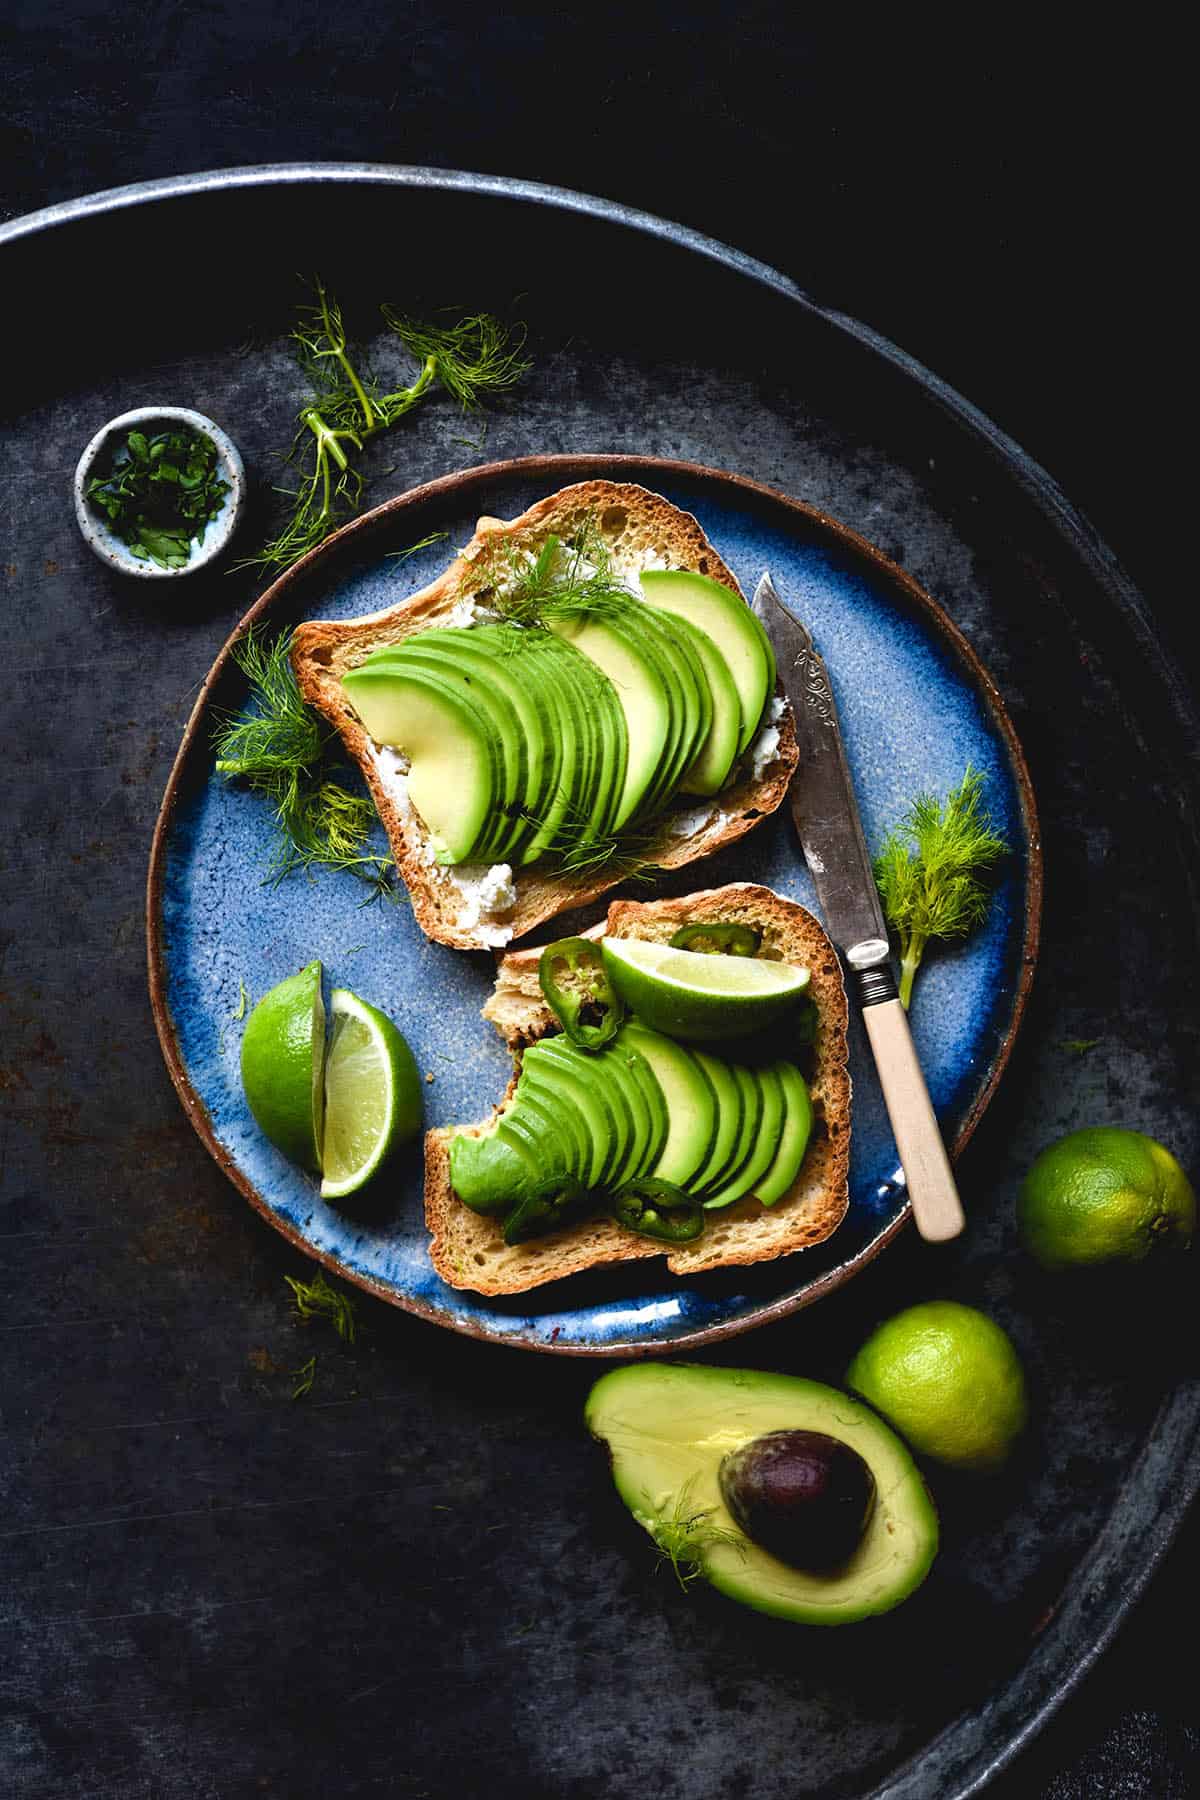 A moody aerial image of gluten free sandwich bread toasted and topped with goat's cheese and sliced avocado. The toast sits on a bright blue plate atop a moody dark steel backdrop, surrounded by extra avocados, herbs and limes